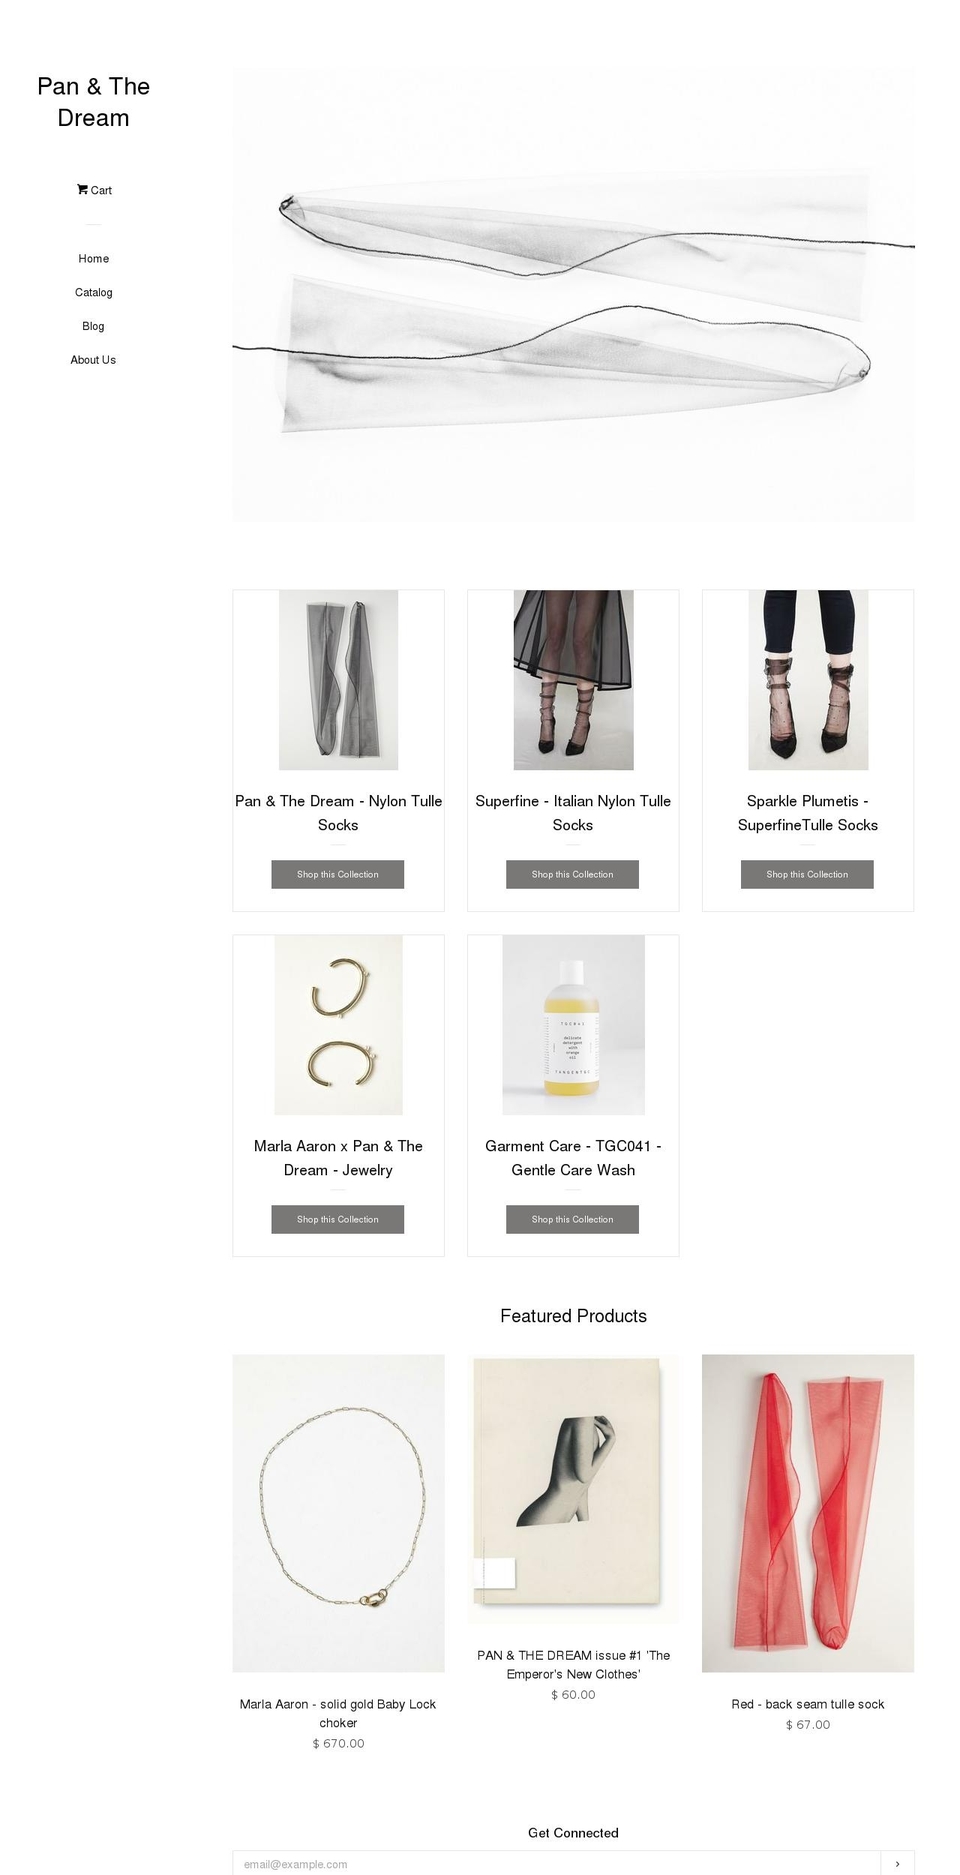 Baseline Shopify theme site example panandthedream.com